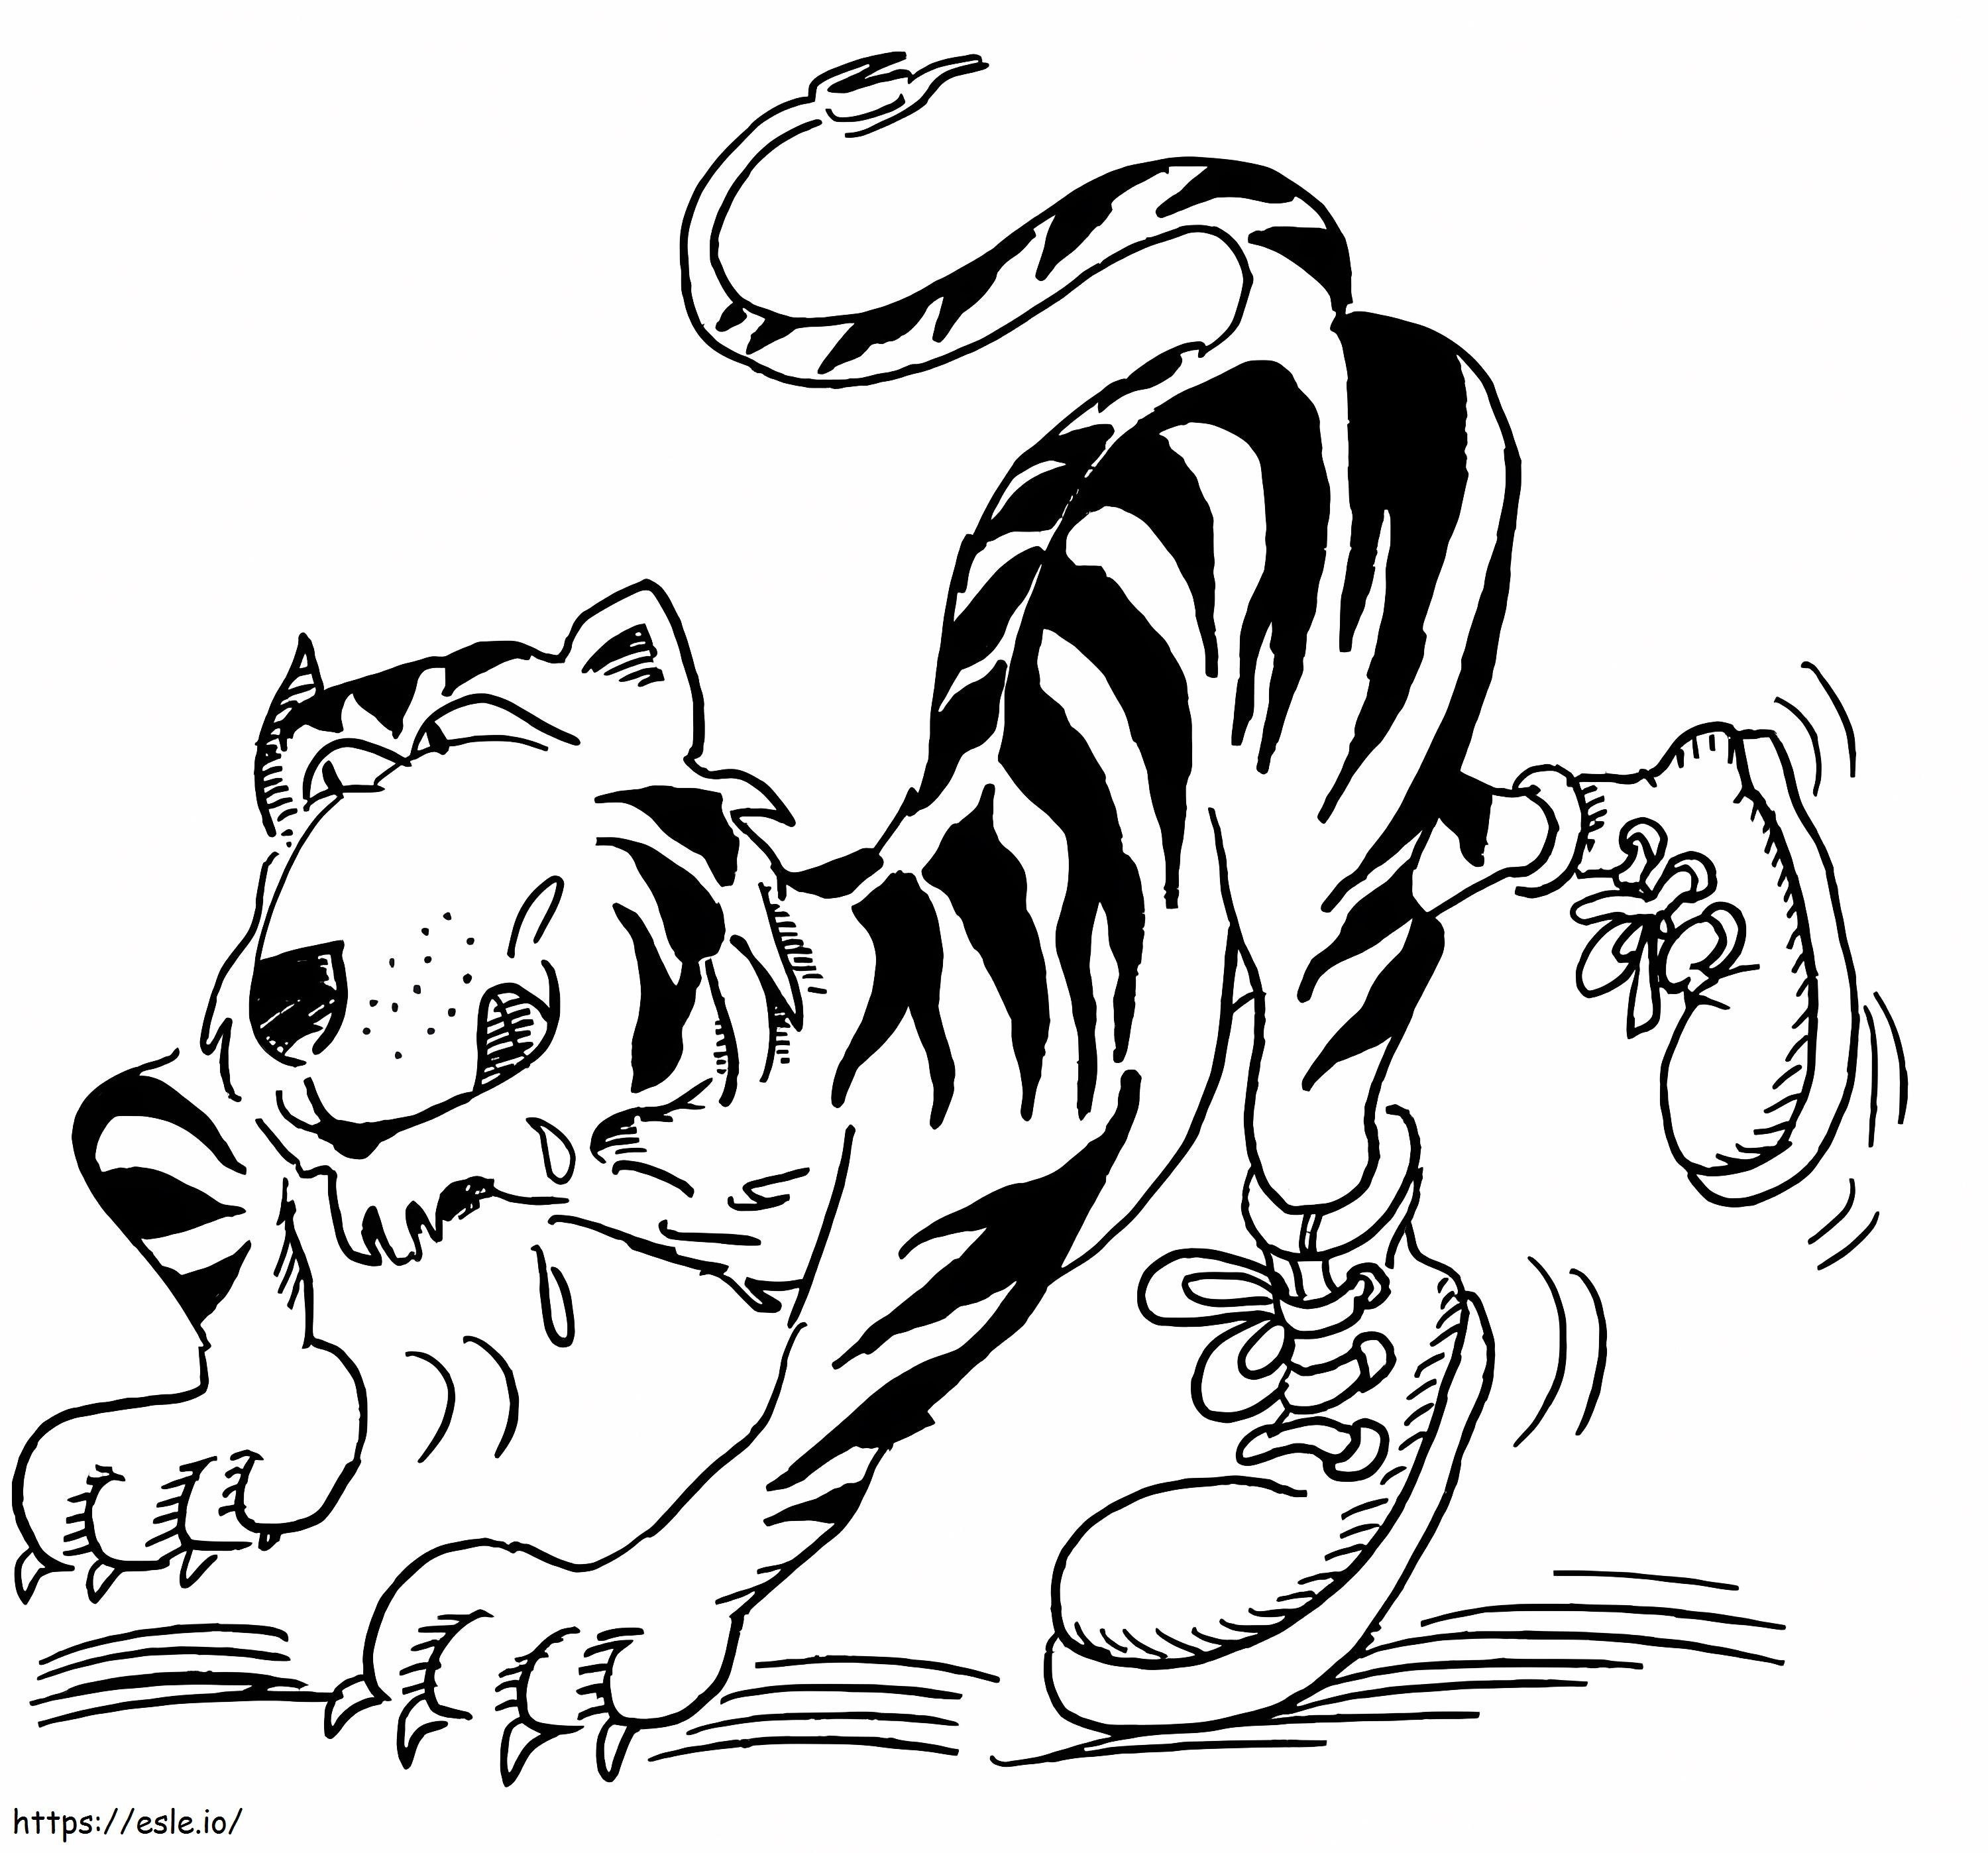 Funny Tiger With Shoes coloring page